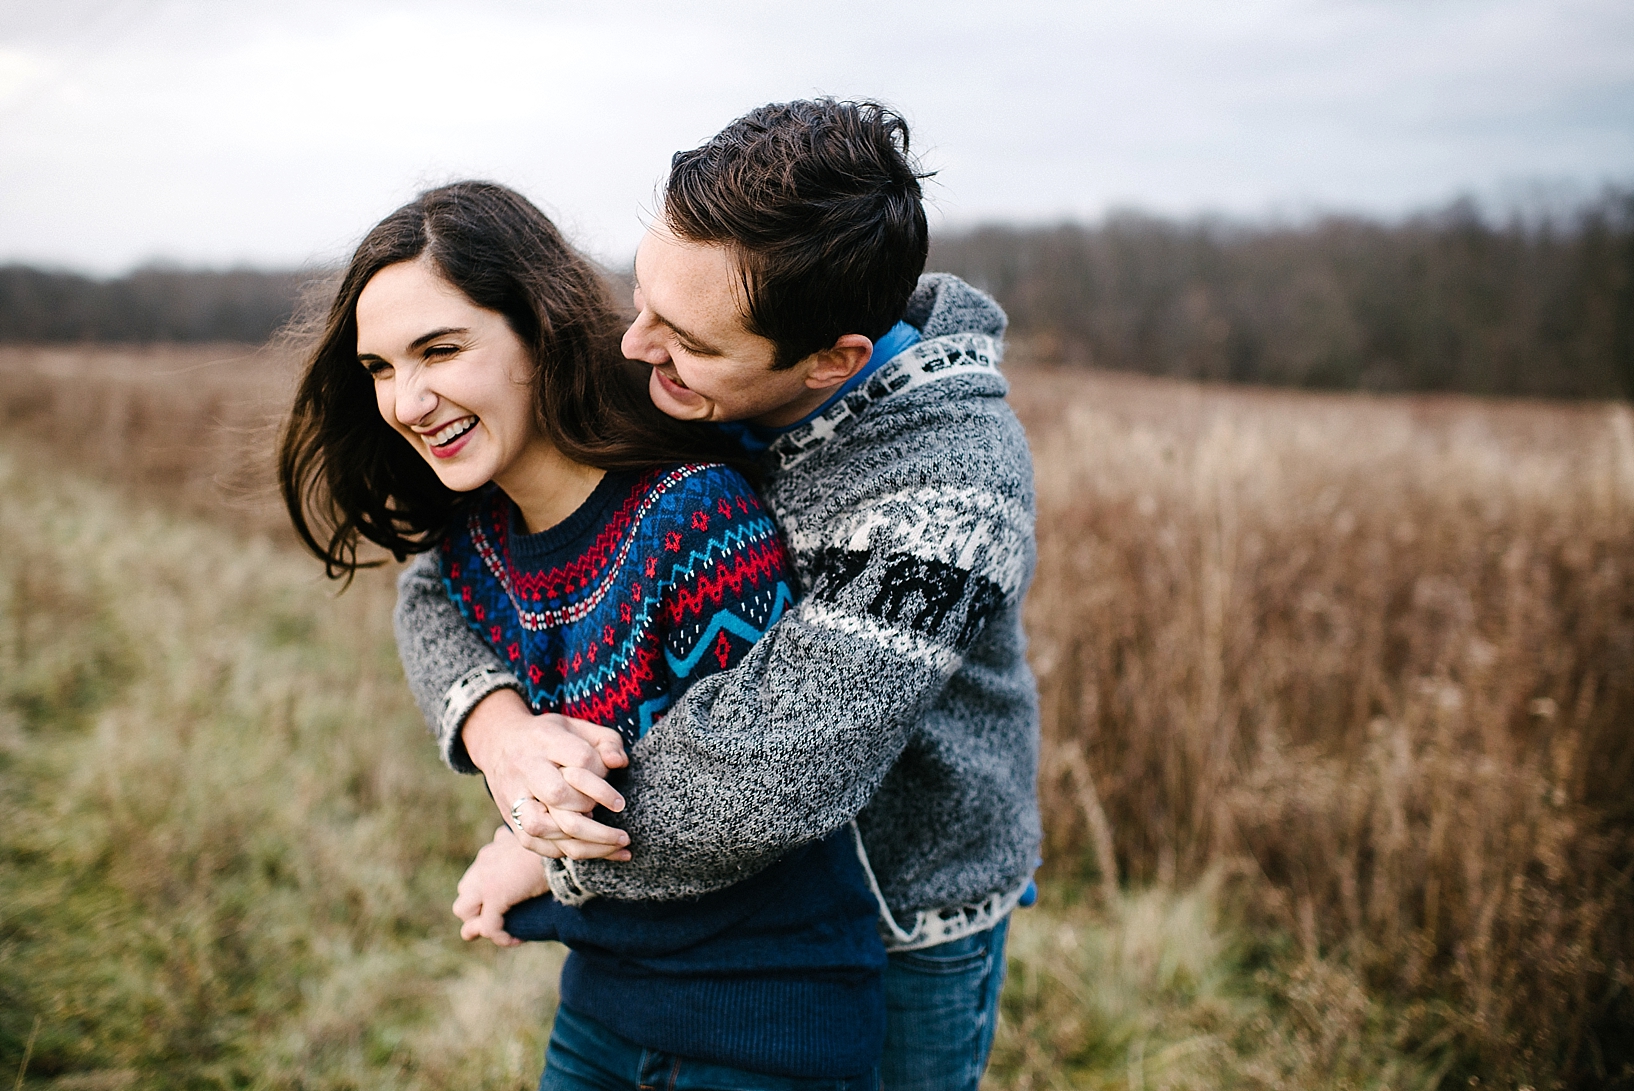 guy in grew sweater hugging woman in blue sweater from behind and laughing